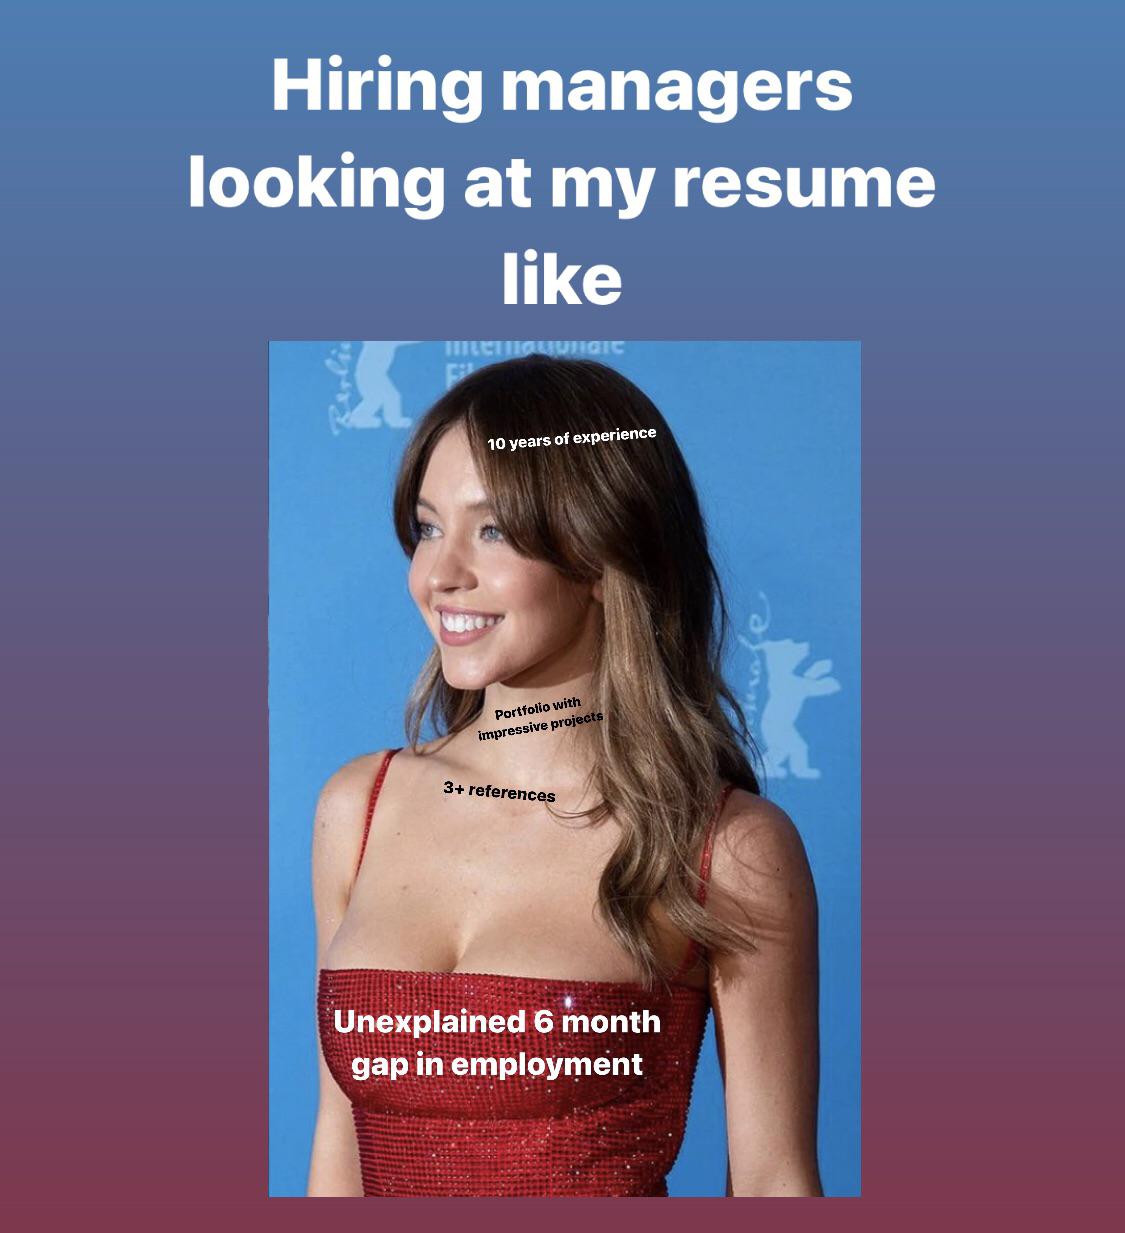 dank memes - Sydney Sweeney - Hiring managers looking at my resume menationidic Fir 10 years of experience Portfolio with impressive projects 3 references Unexplained 6 month gap in employment